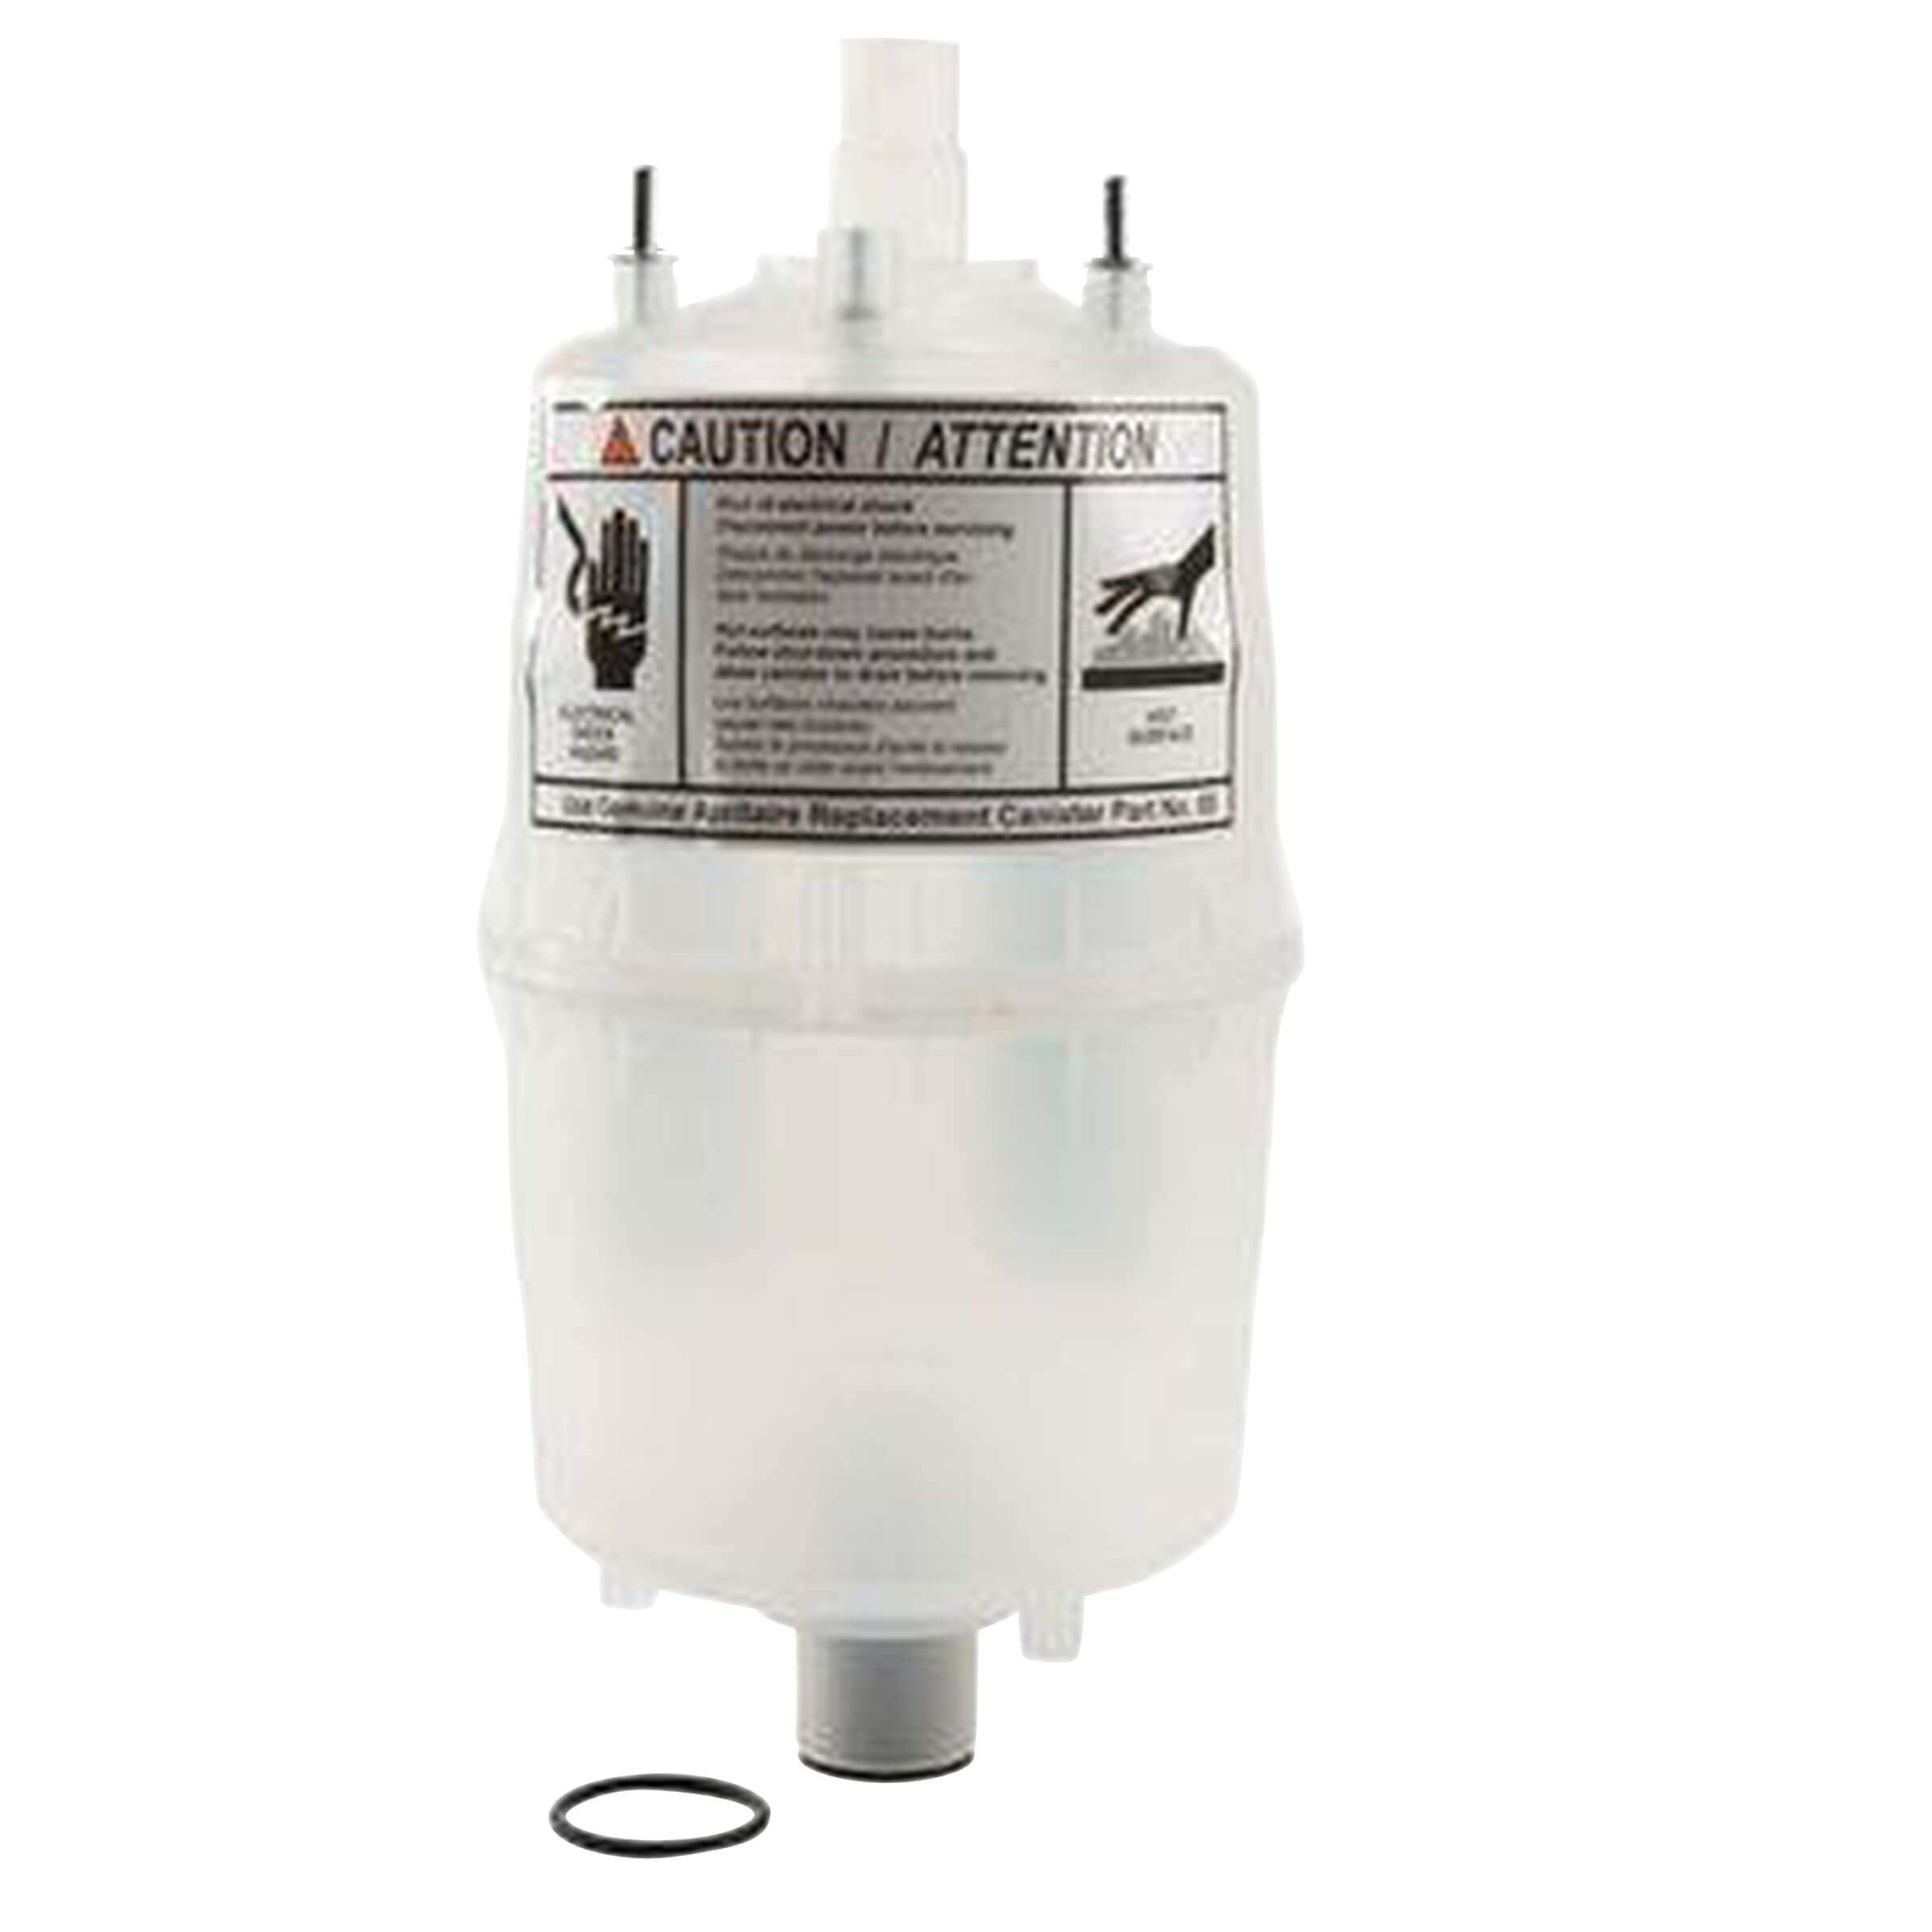 Aprilaire 80 Steam Canister For Steam Humidifier Model 800 & 865